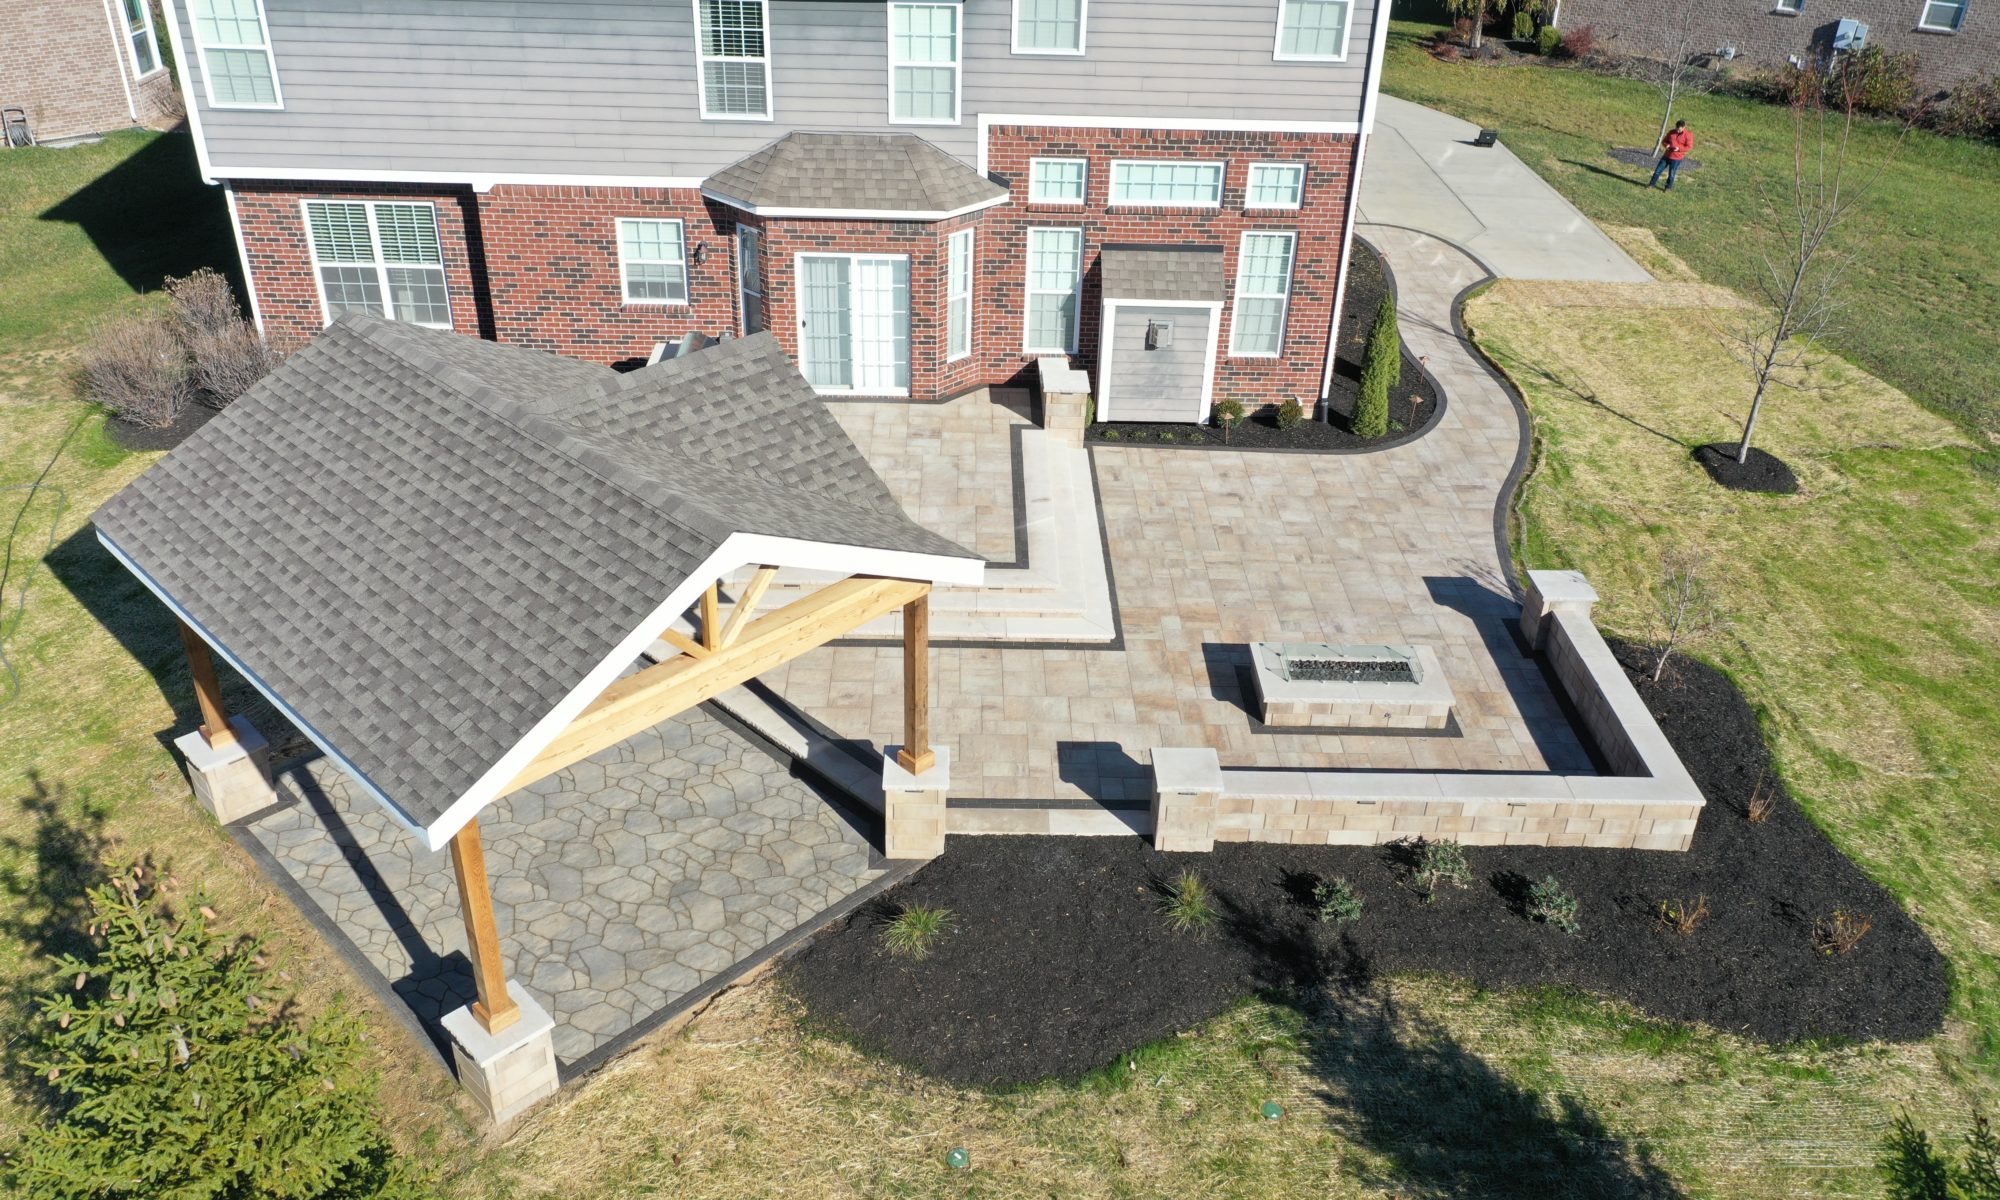 Gables at Hickory Stick Greenwood Bargersville Indiana Paver Patio Gas burning fire pit exterior build dream backyard gable roof structure walkway custom custom landscaping outdoor kitchen mini fridge mini refrigerator fan lighting grill